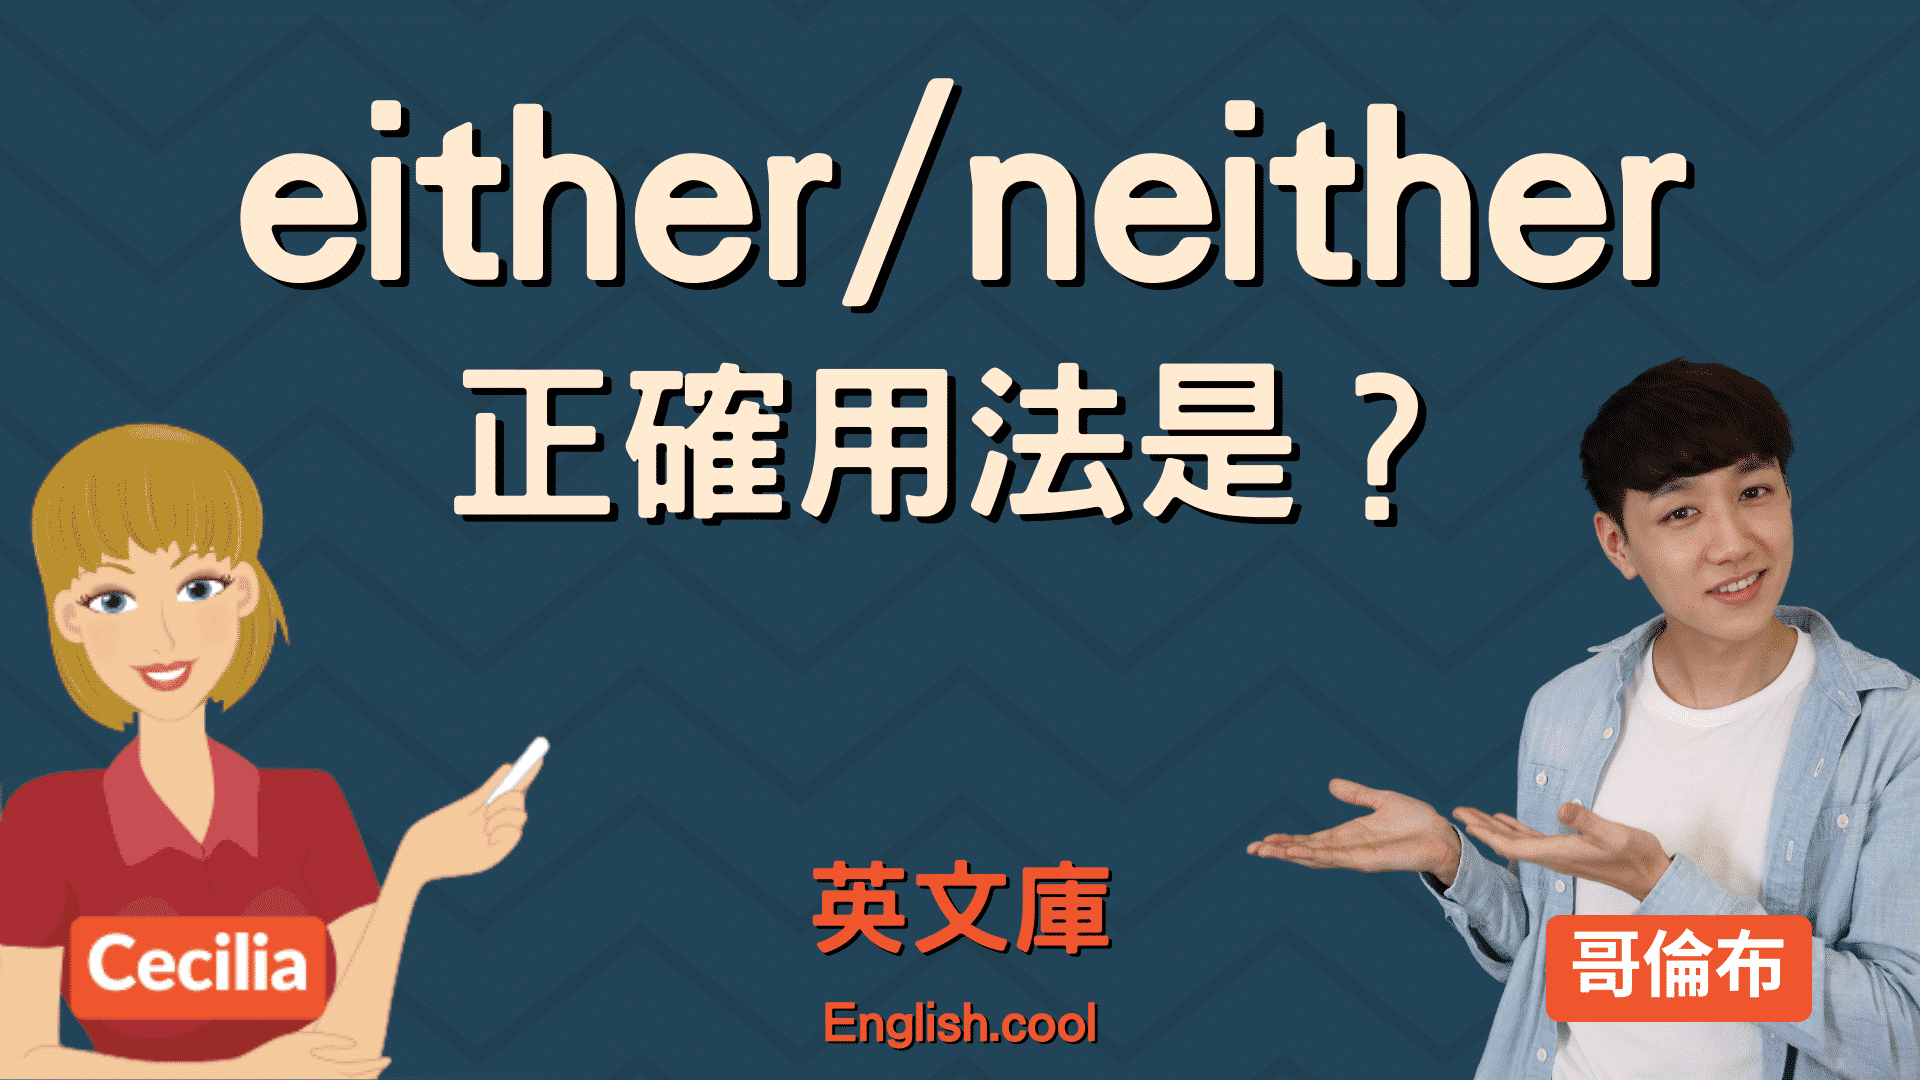 You are currently viewing 「either」和「neither」正確用法是？來看例句搞懂！